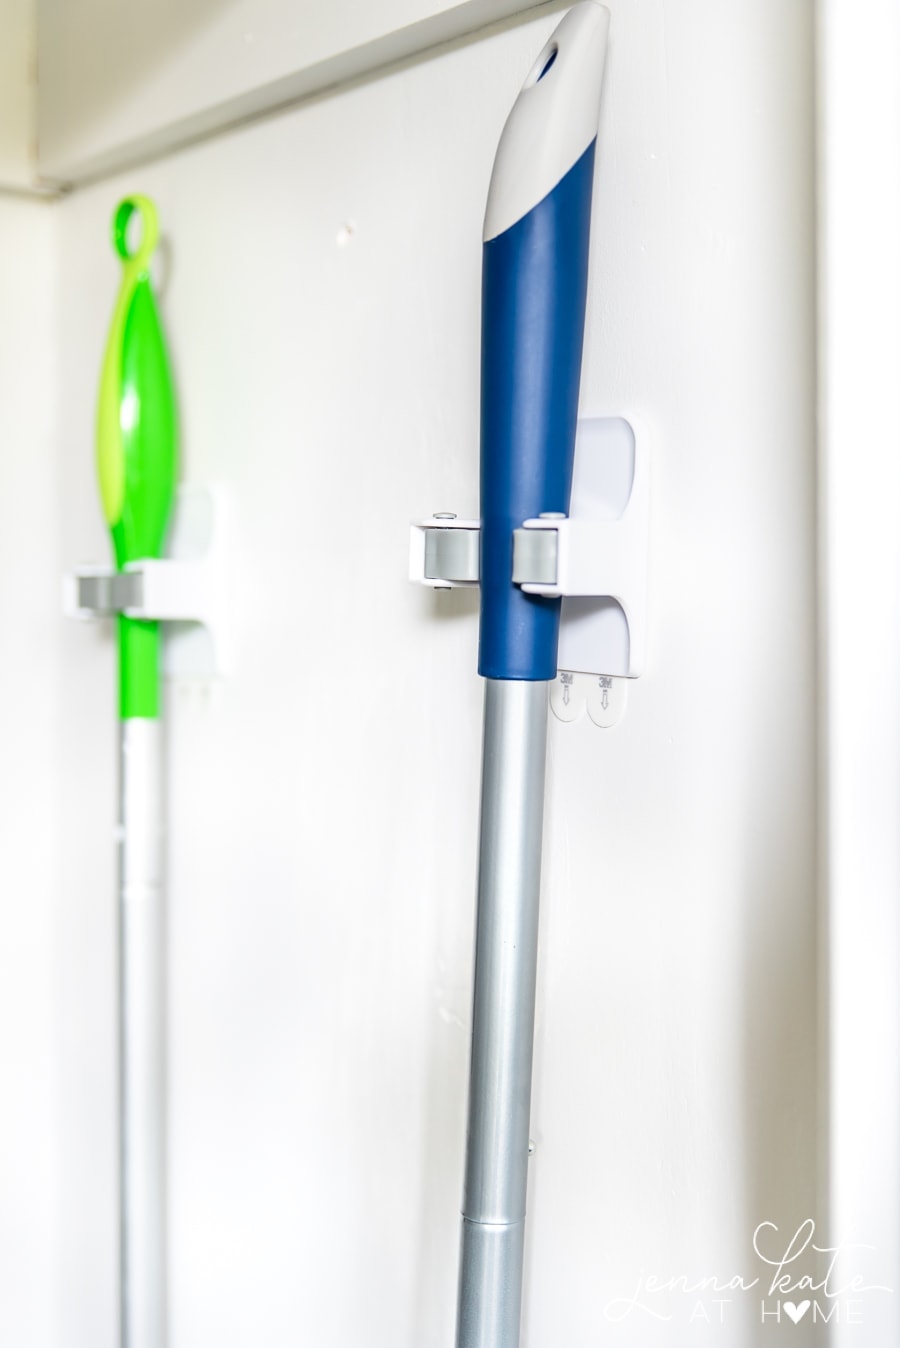 A close-up of wall-mounted clips that hold mop and broom handles in the closet